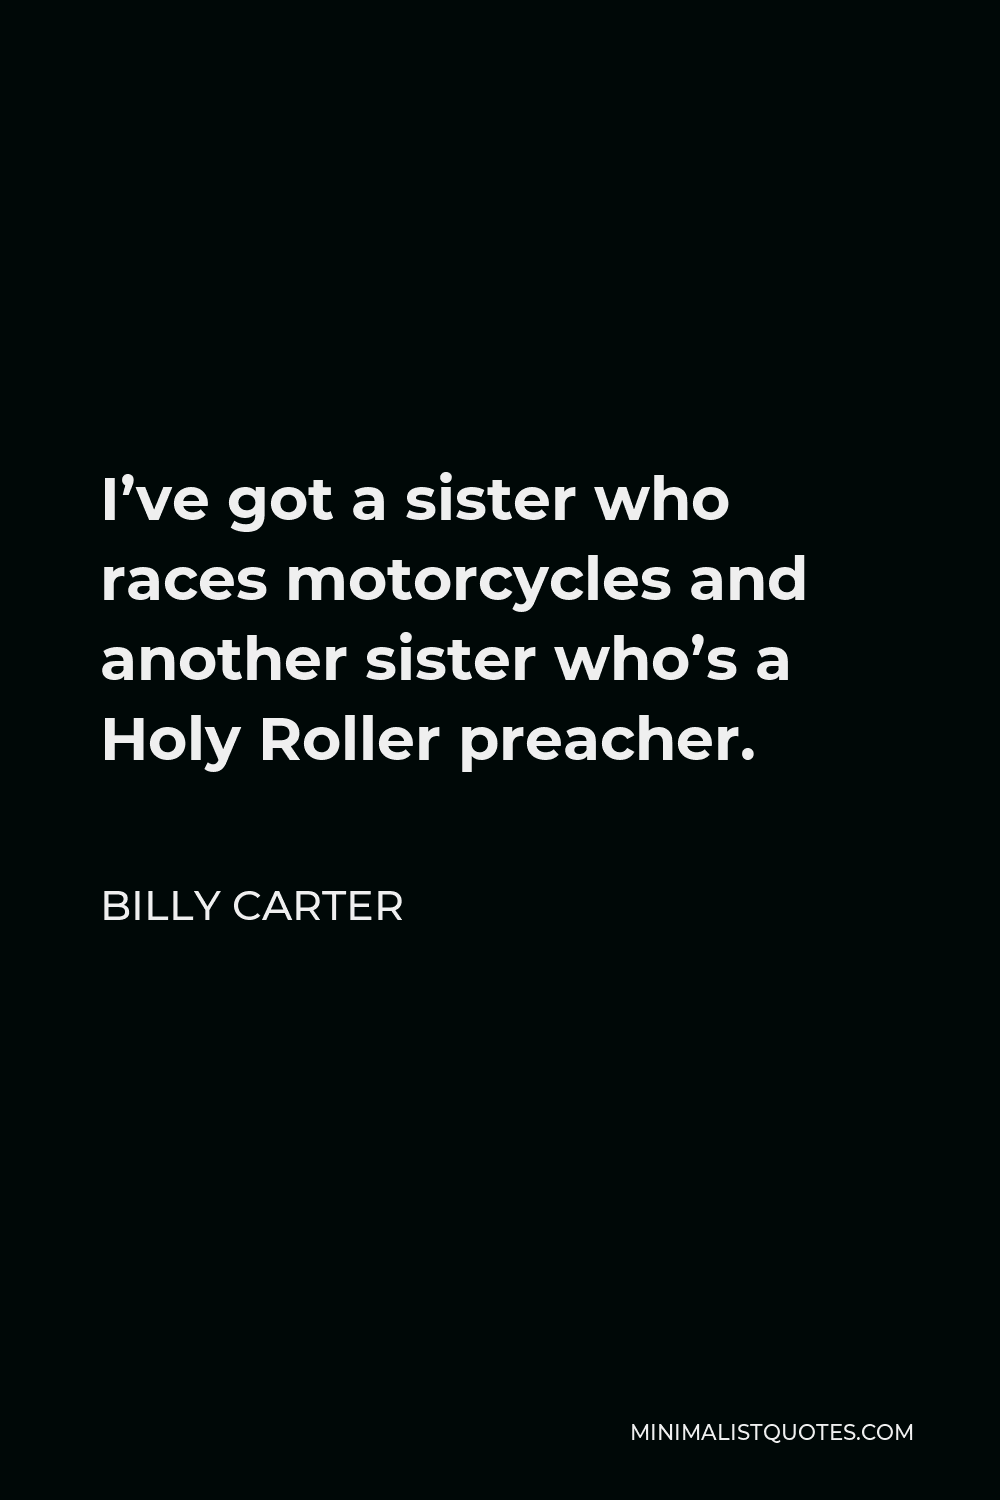 Billy Carter Quote - I’ve got a sister who races motorcycles and another sister who’s a Holy Roller preacher.